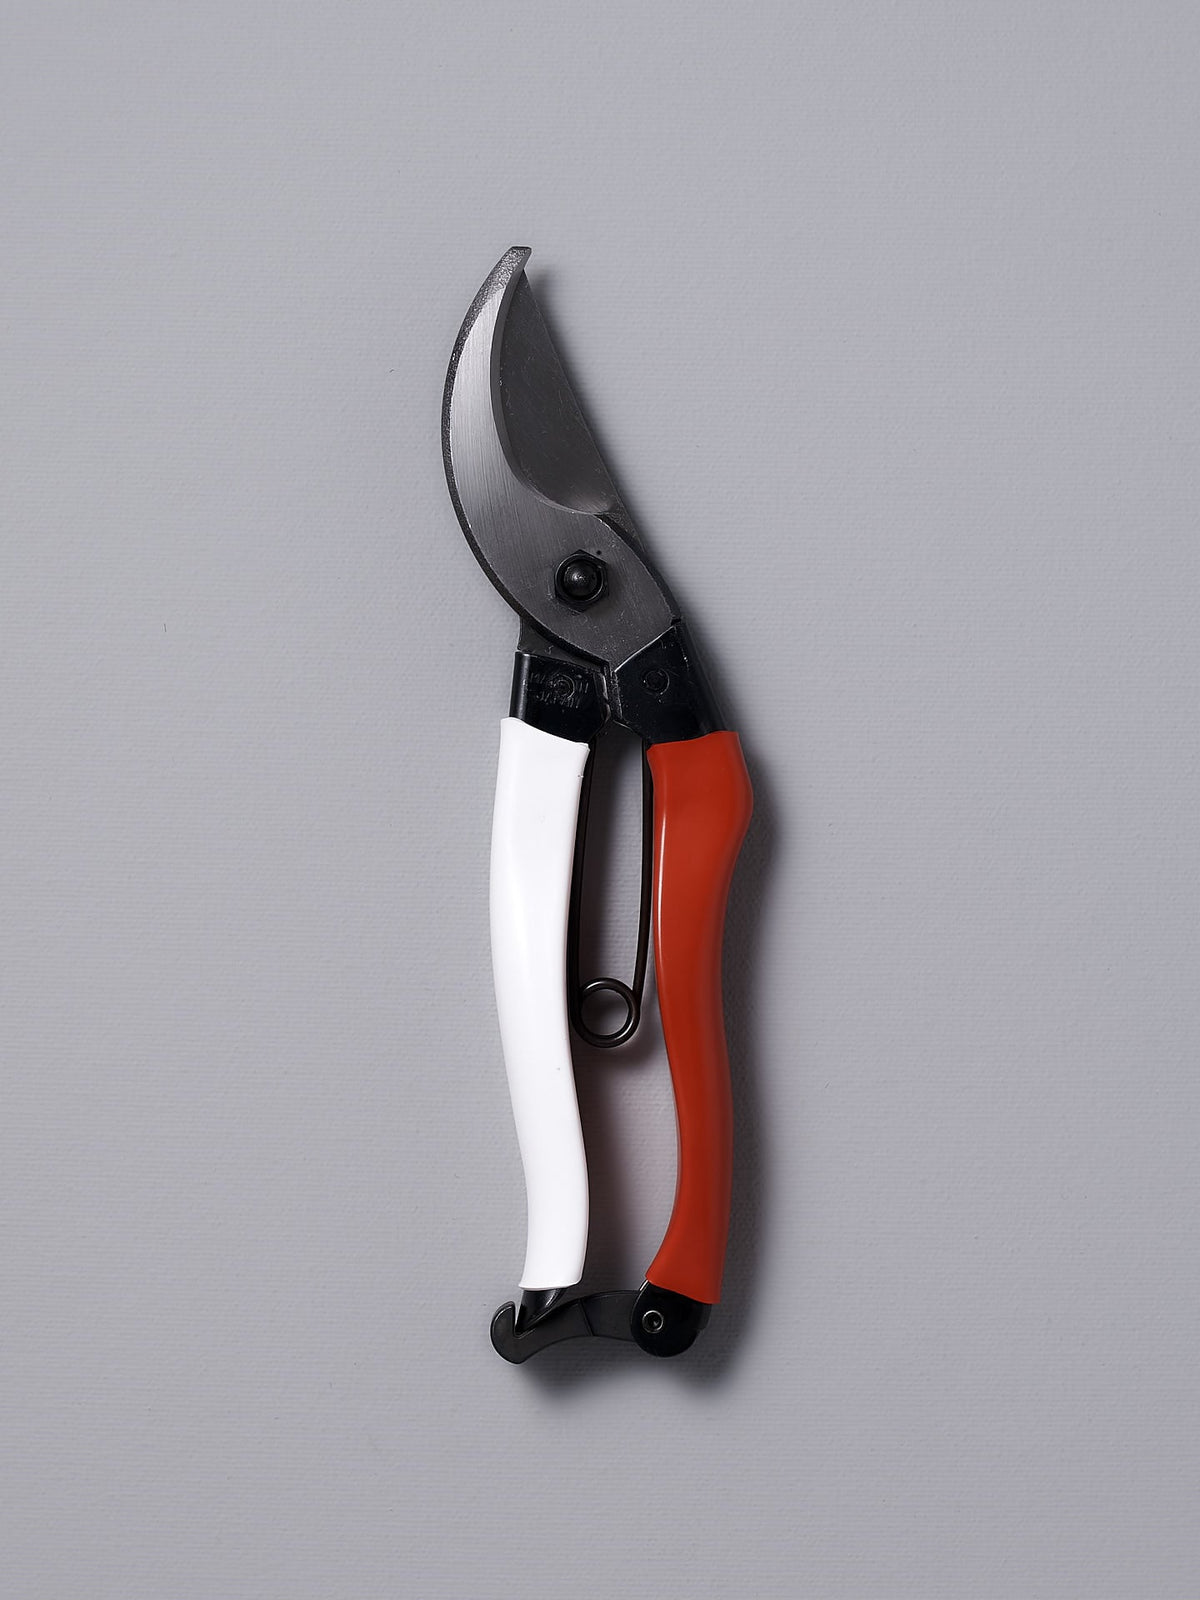 A pair of Okatsune Japanese Secateurs №103 with red and white handles.